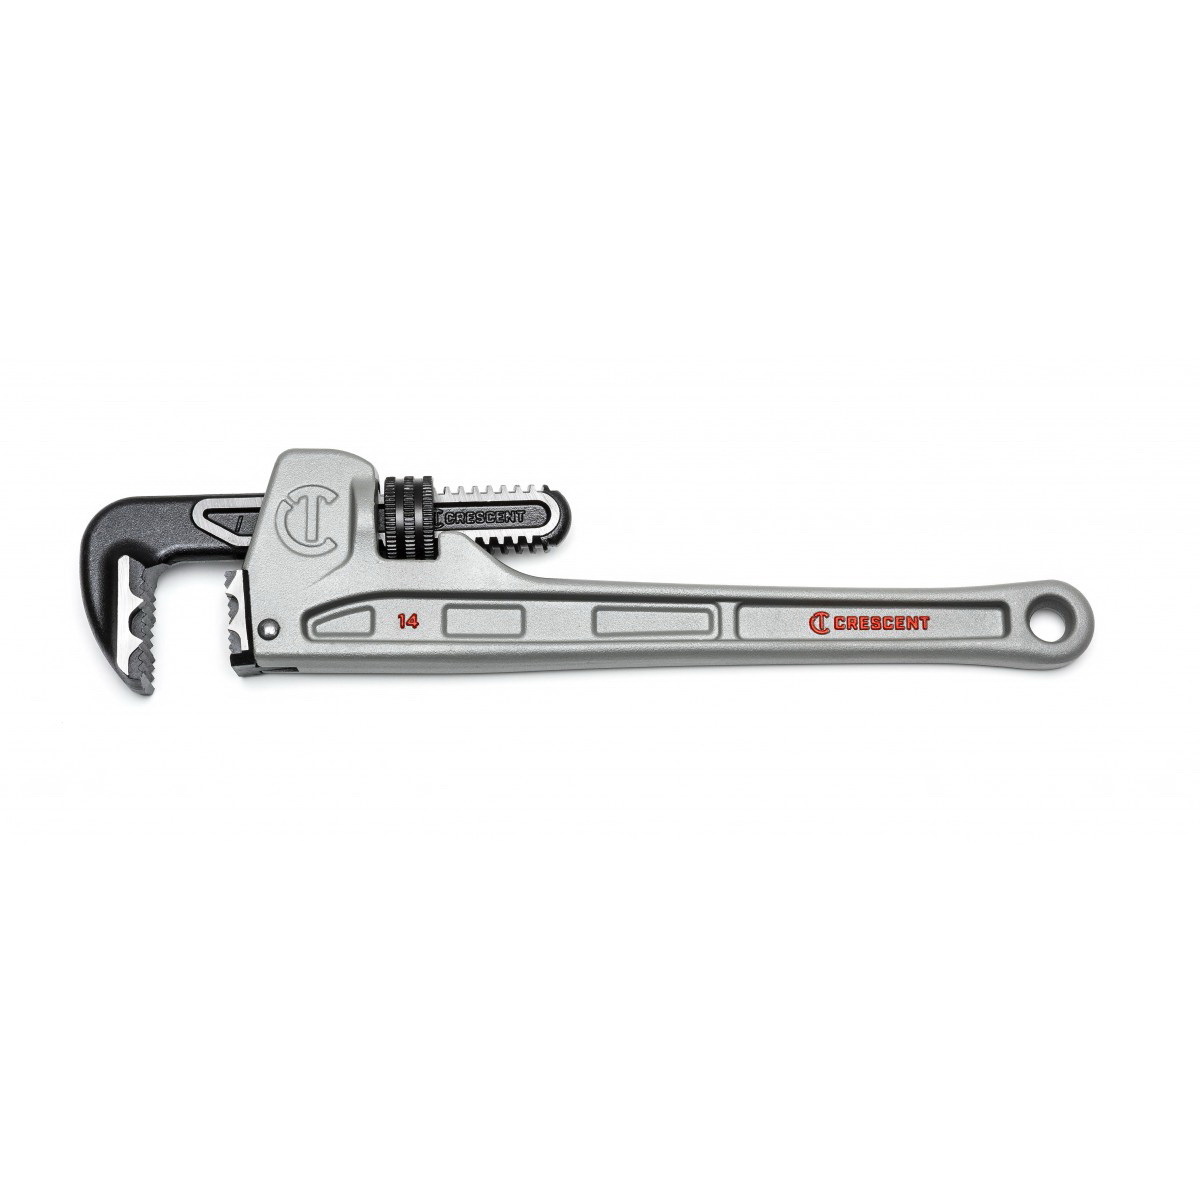 CAPW14 Pipe Wrench, 0 to 2-3/8 in Jaw, 14 in L, Aluminum, Powder-Coated